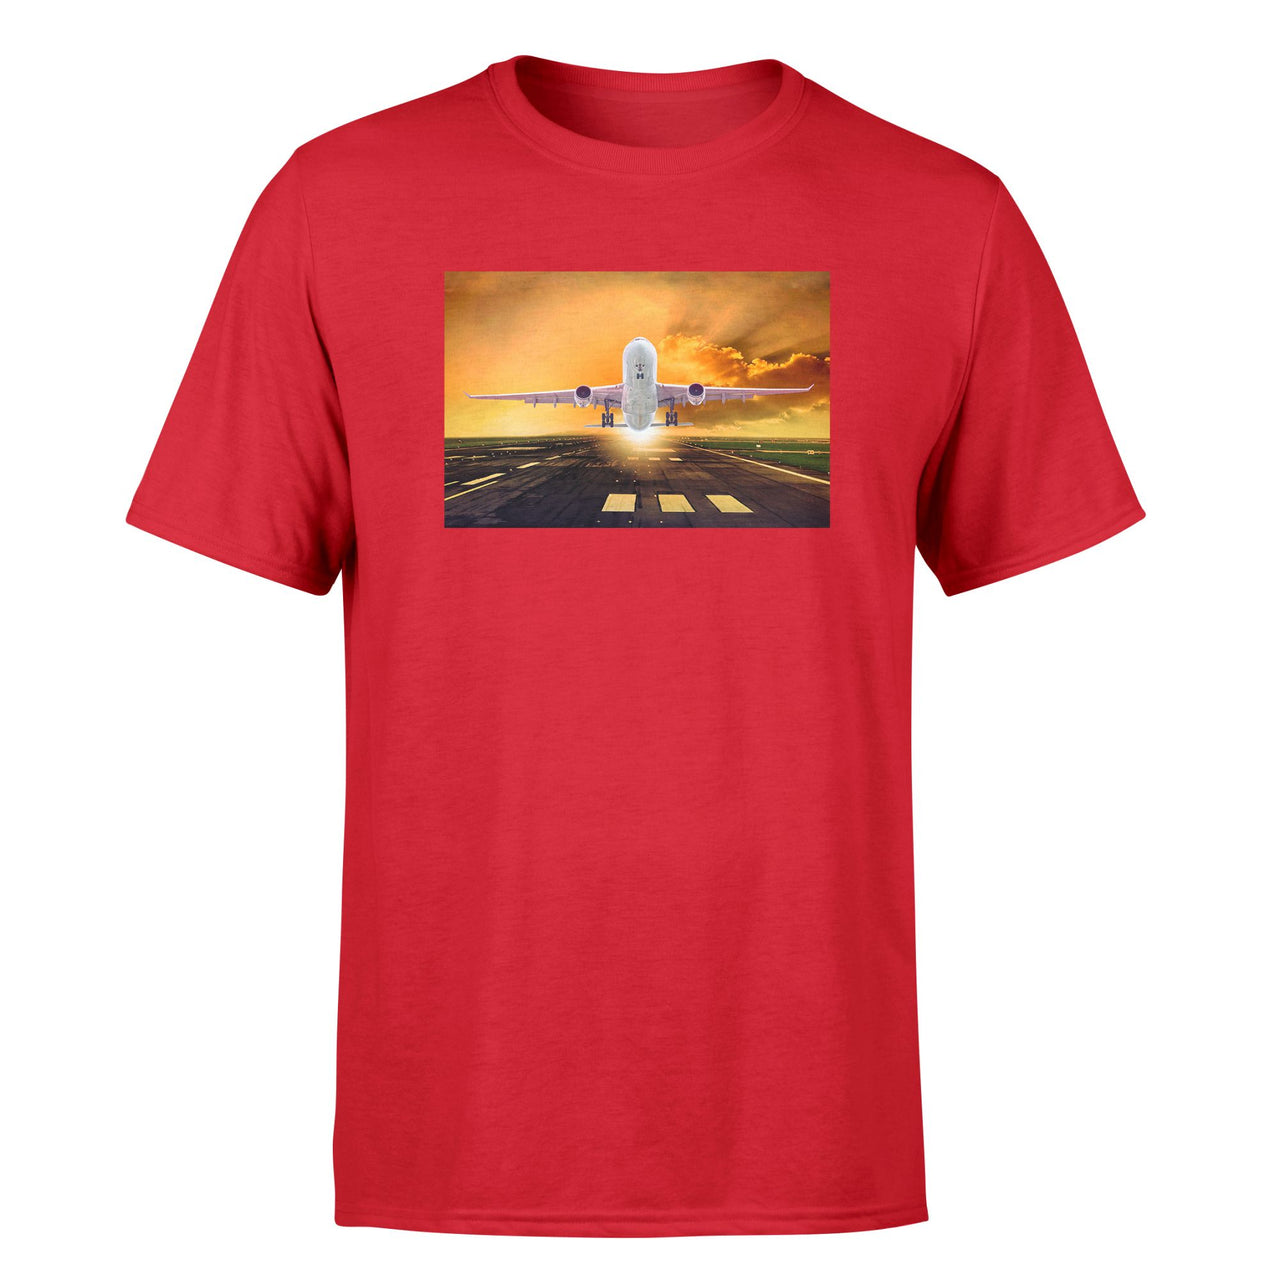 Amazing Departing Aircraft Sunset & Clouds Behind Designed T-Shirts